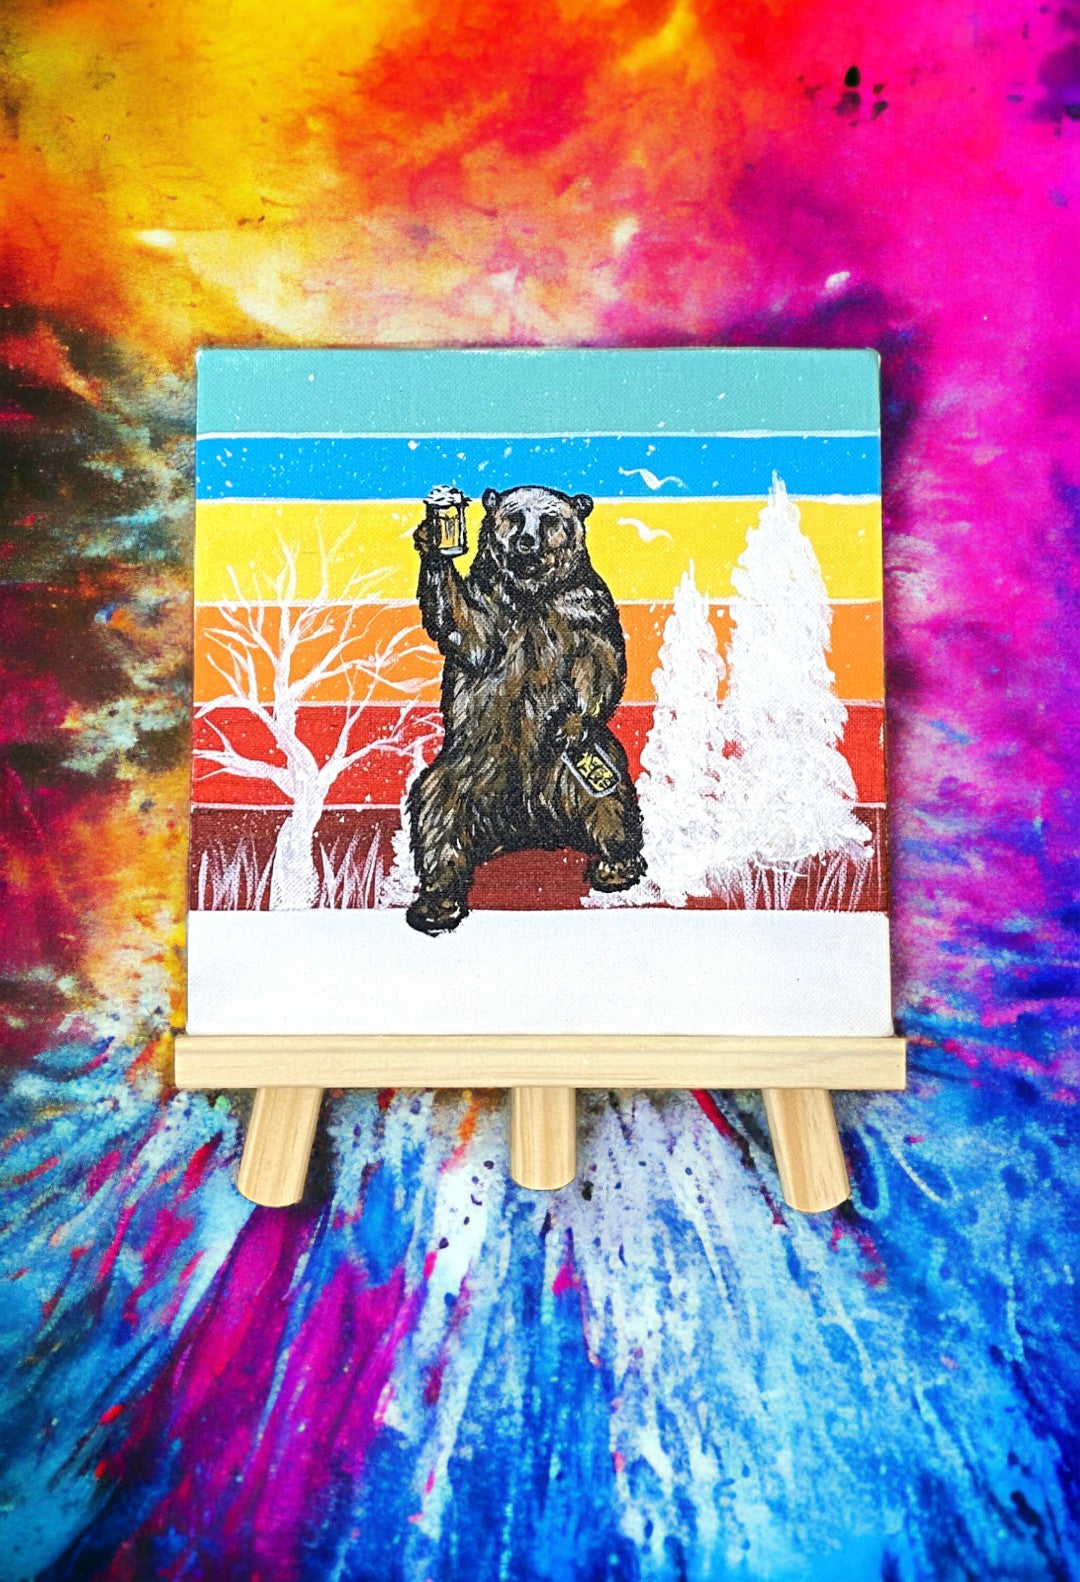 Emerald Blossoms - A hand painted canvas &quot;Beer Bear Camping under the Moonlight&quot;